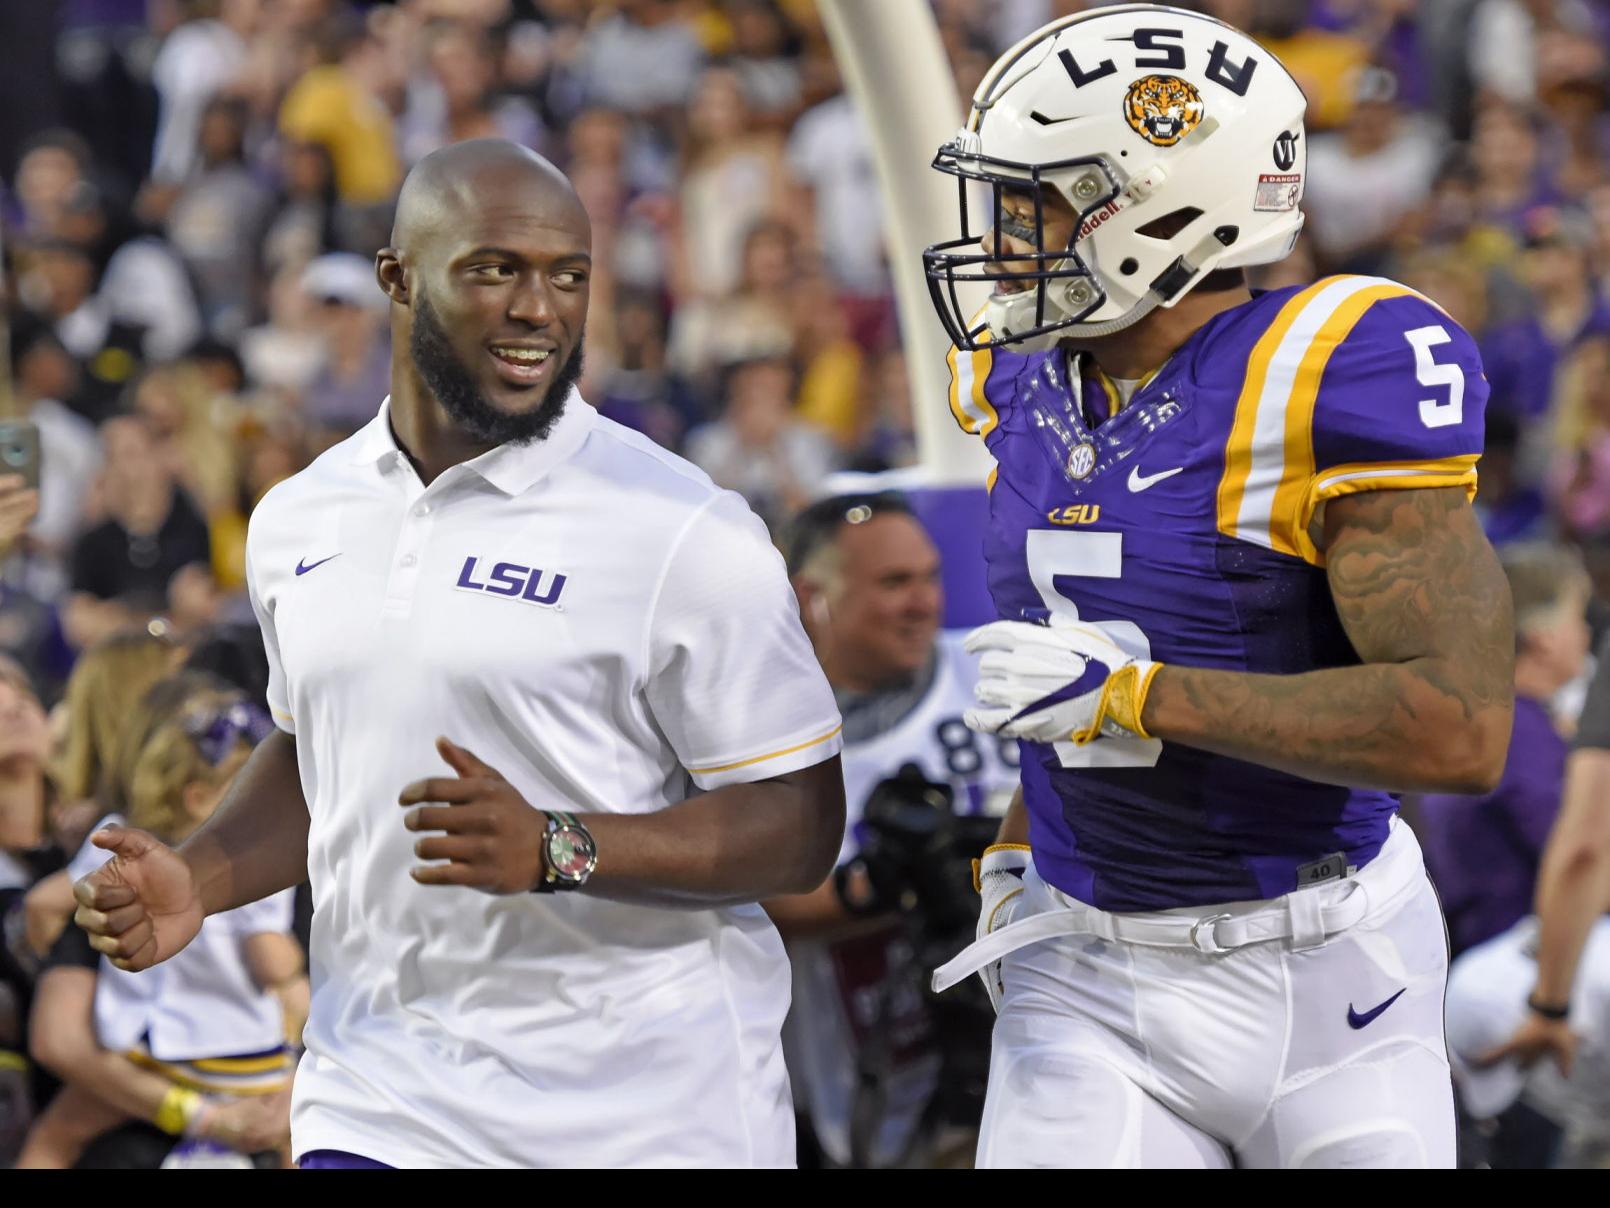 Leonard Fournette on LSU star Derrius Guice: I believe he can be